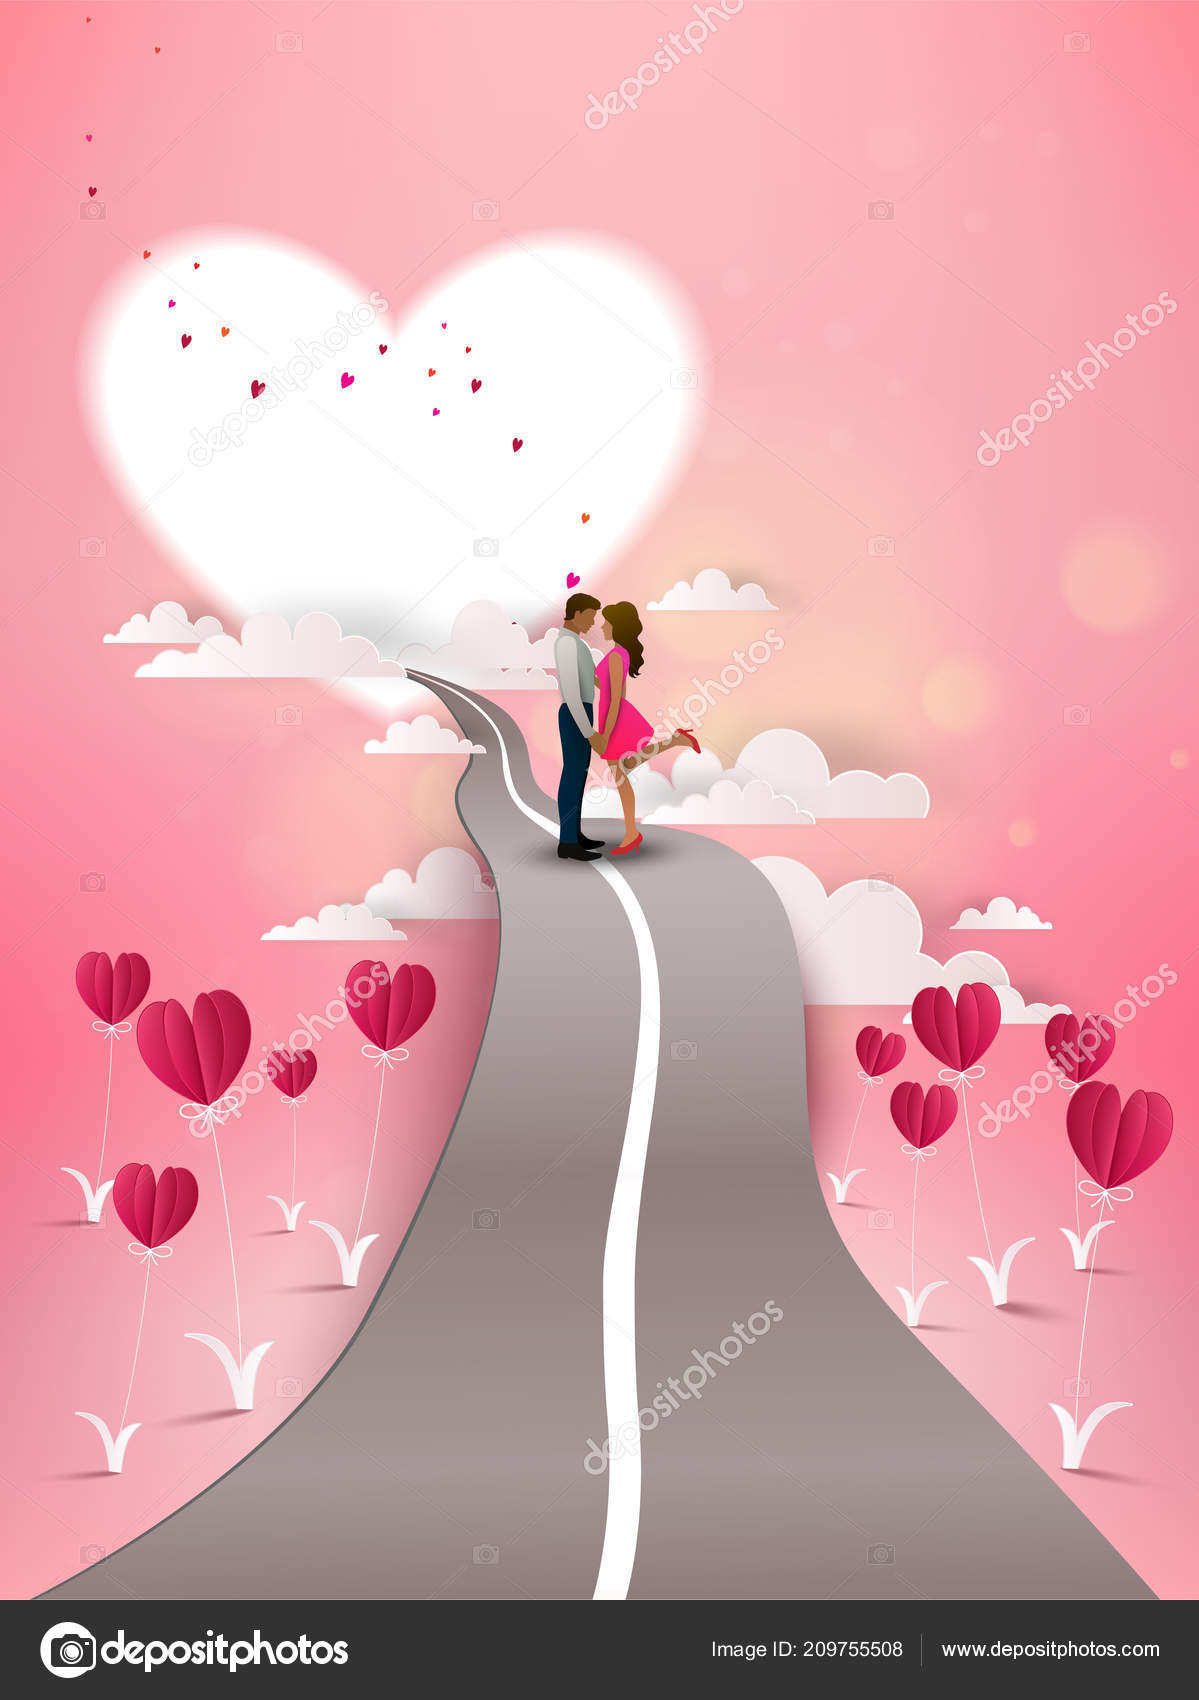 Red Heart Flower Pink Background Couple Kissing Road Love